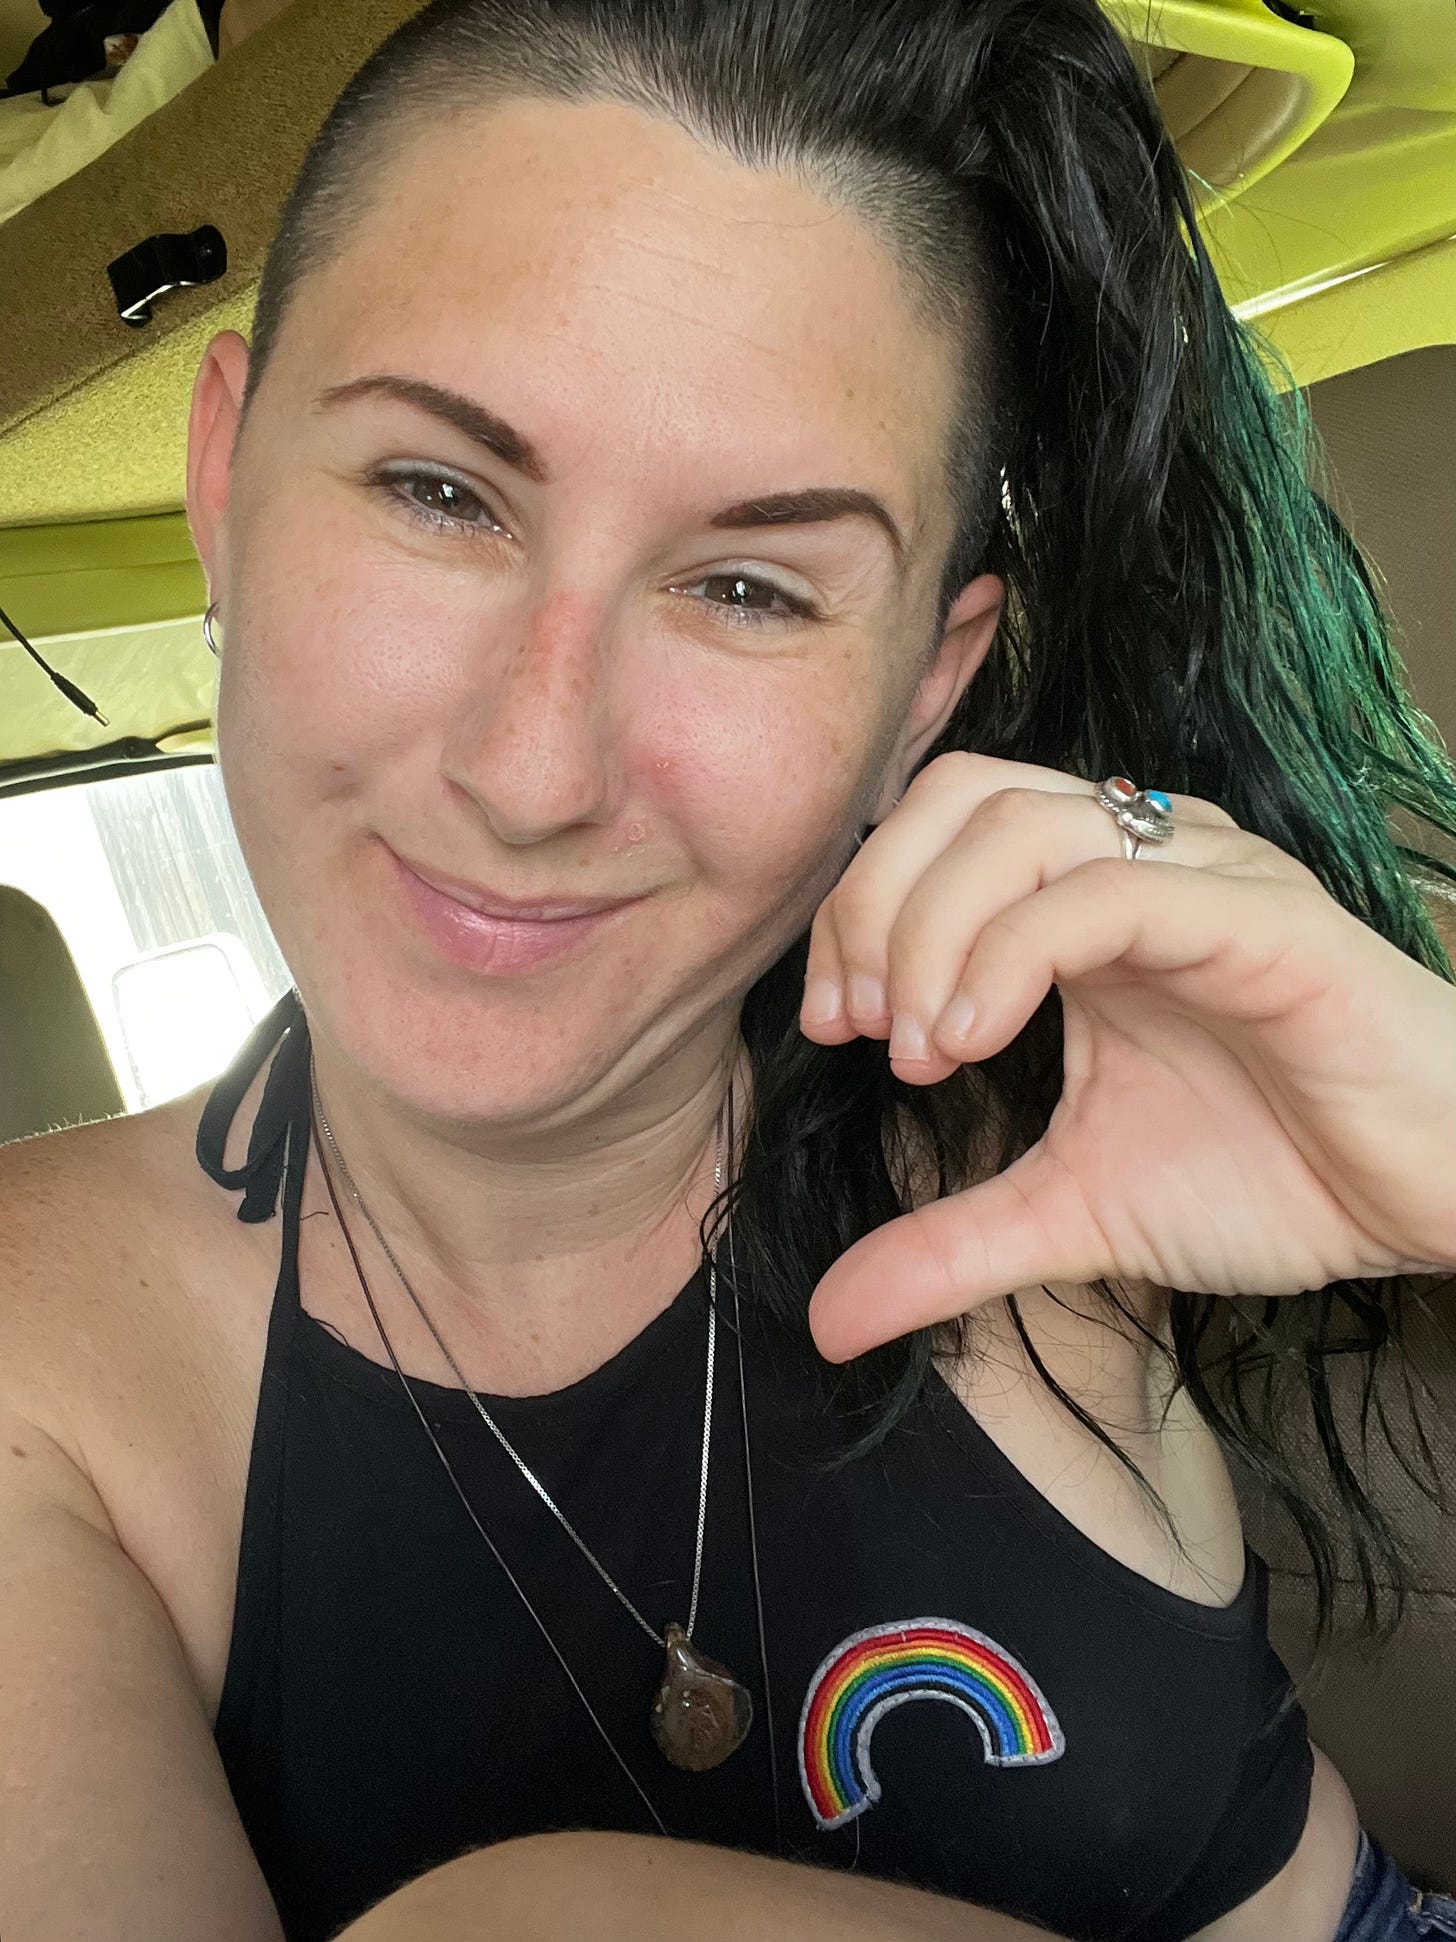 Lyric, more recently, holding up a one half of a heart hand, sitting in their RV smiling. They wear a brown wooden necklace with a thunderbird tack on it, and a black halter top with a rainbow on it, and are smiling at the camerea. 